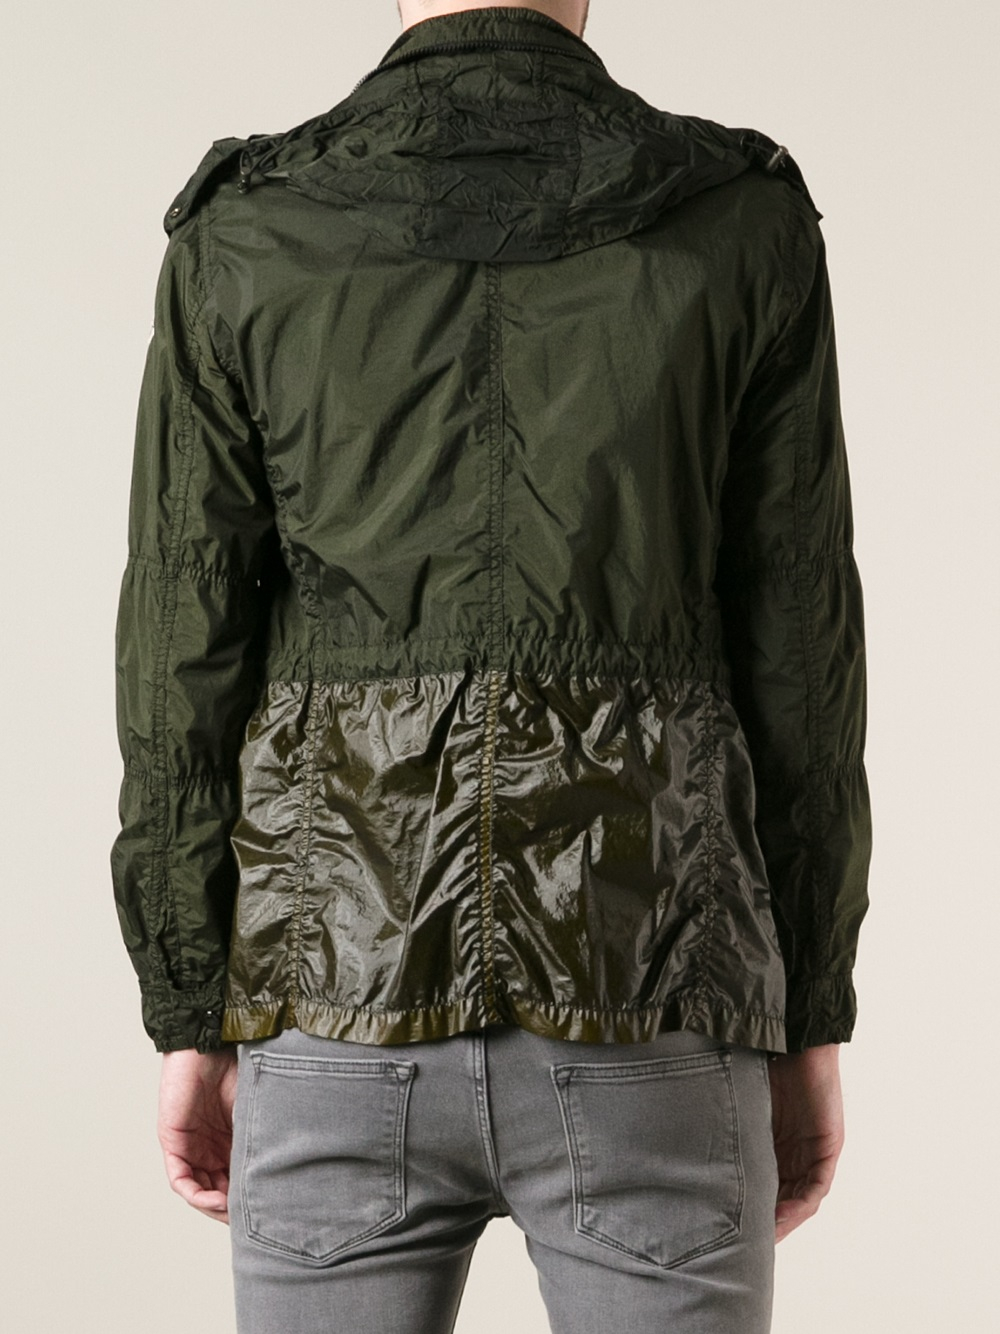 Lyst Moncler Military Jacket in Green for Men